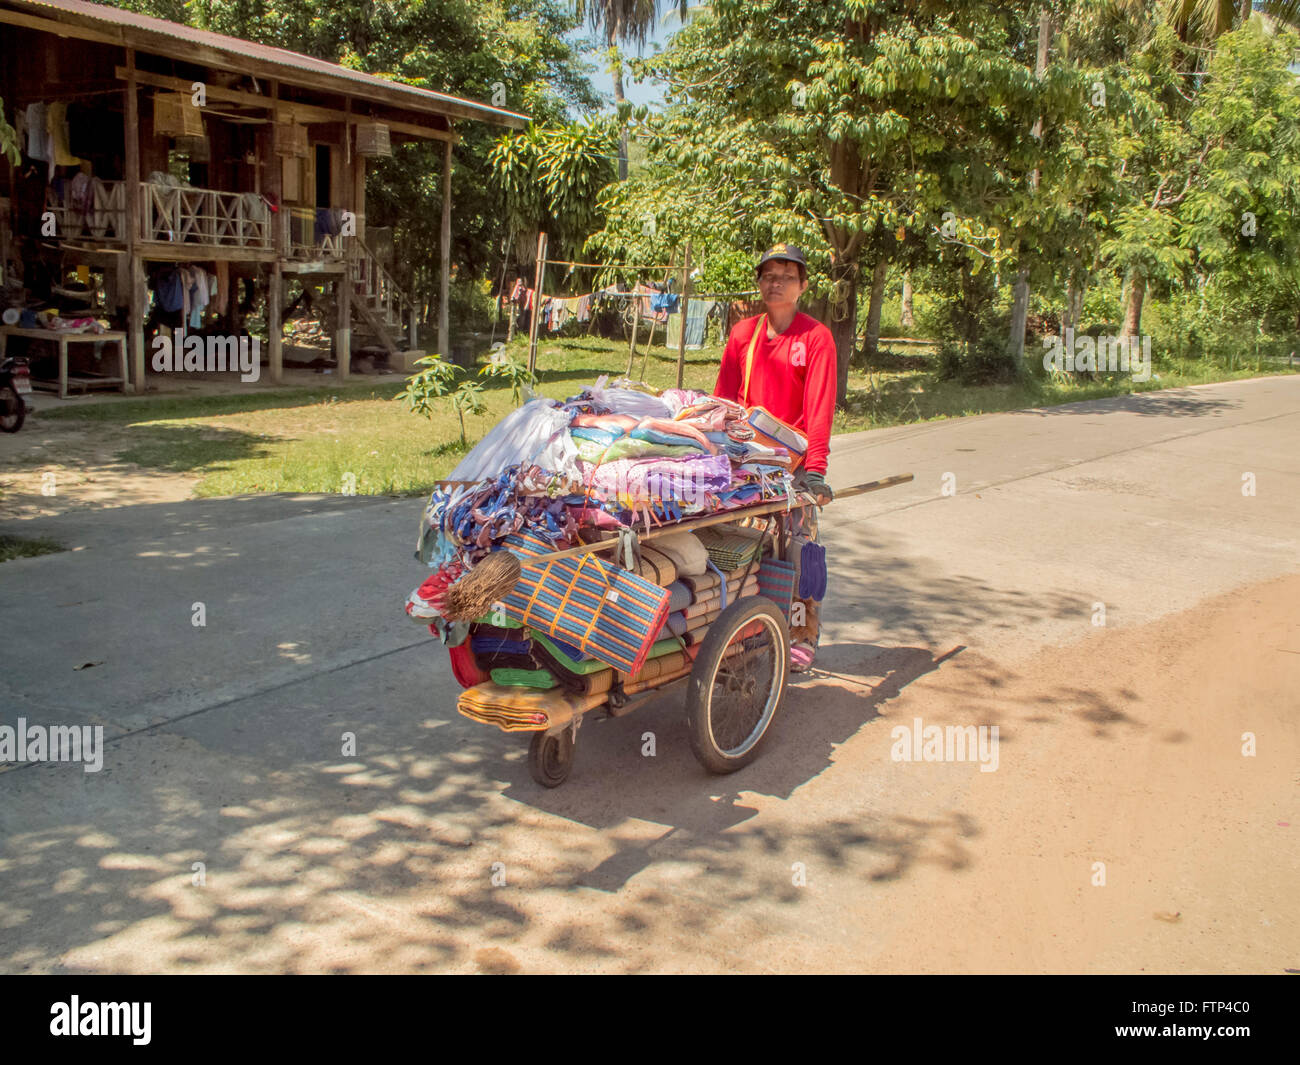 Kho Yao Yai island local traders selling their wares. local man sells mats and fabric from his barrow. Stock Photo